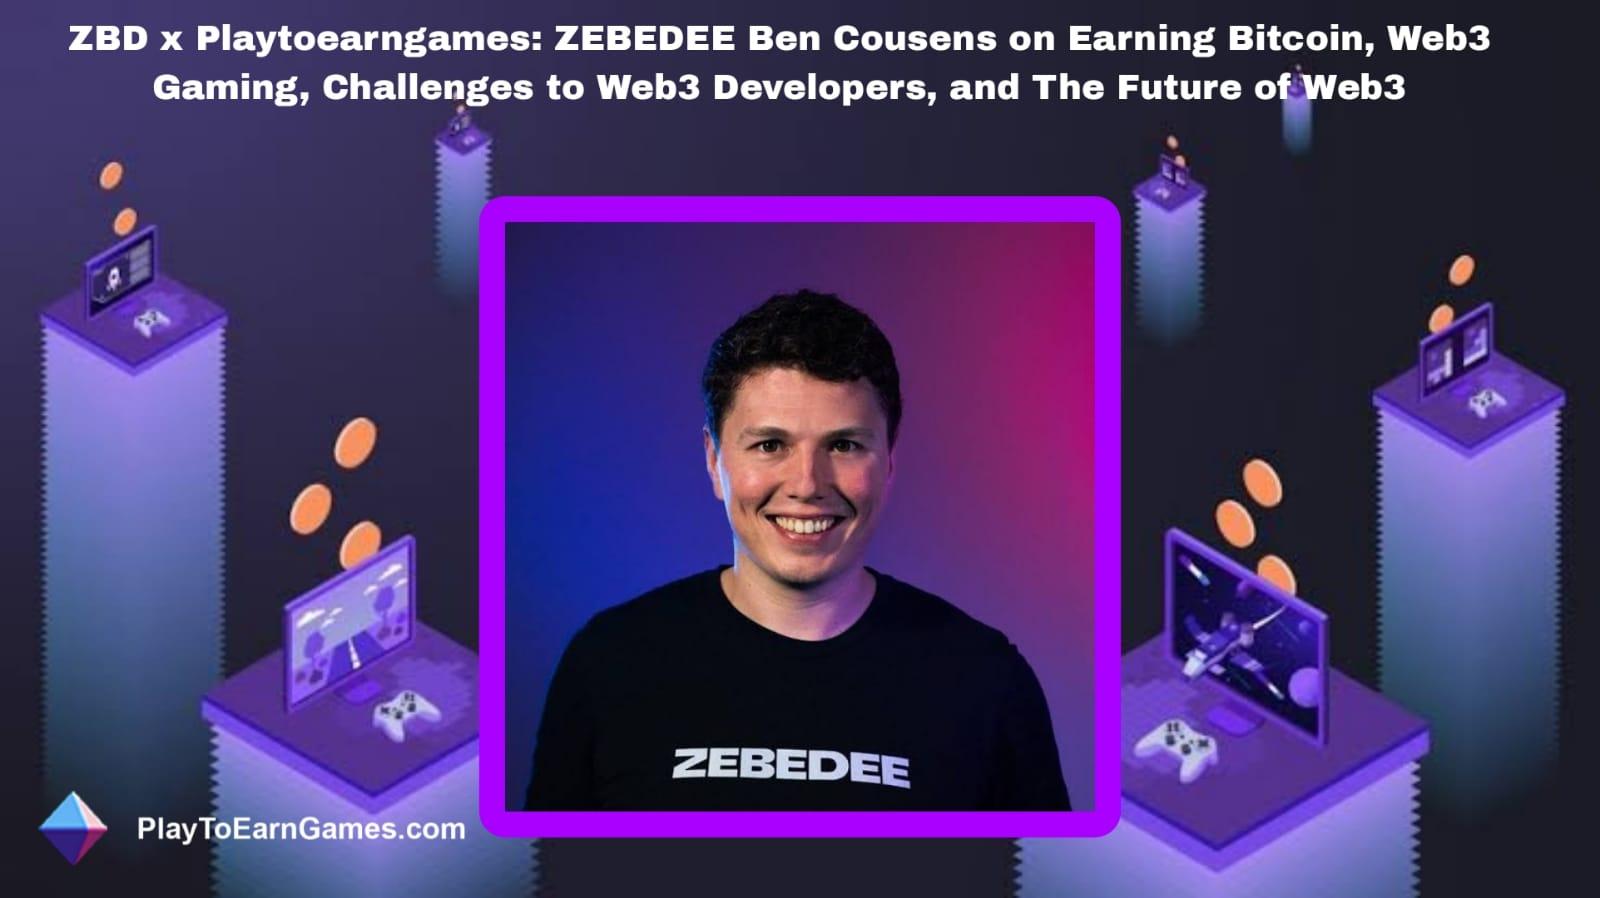 ZBD's Bitcoin Rewards, Trends, and Interview with Ben Cousens